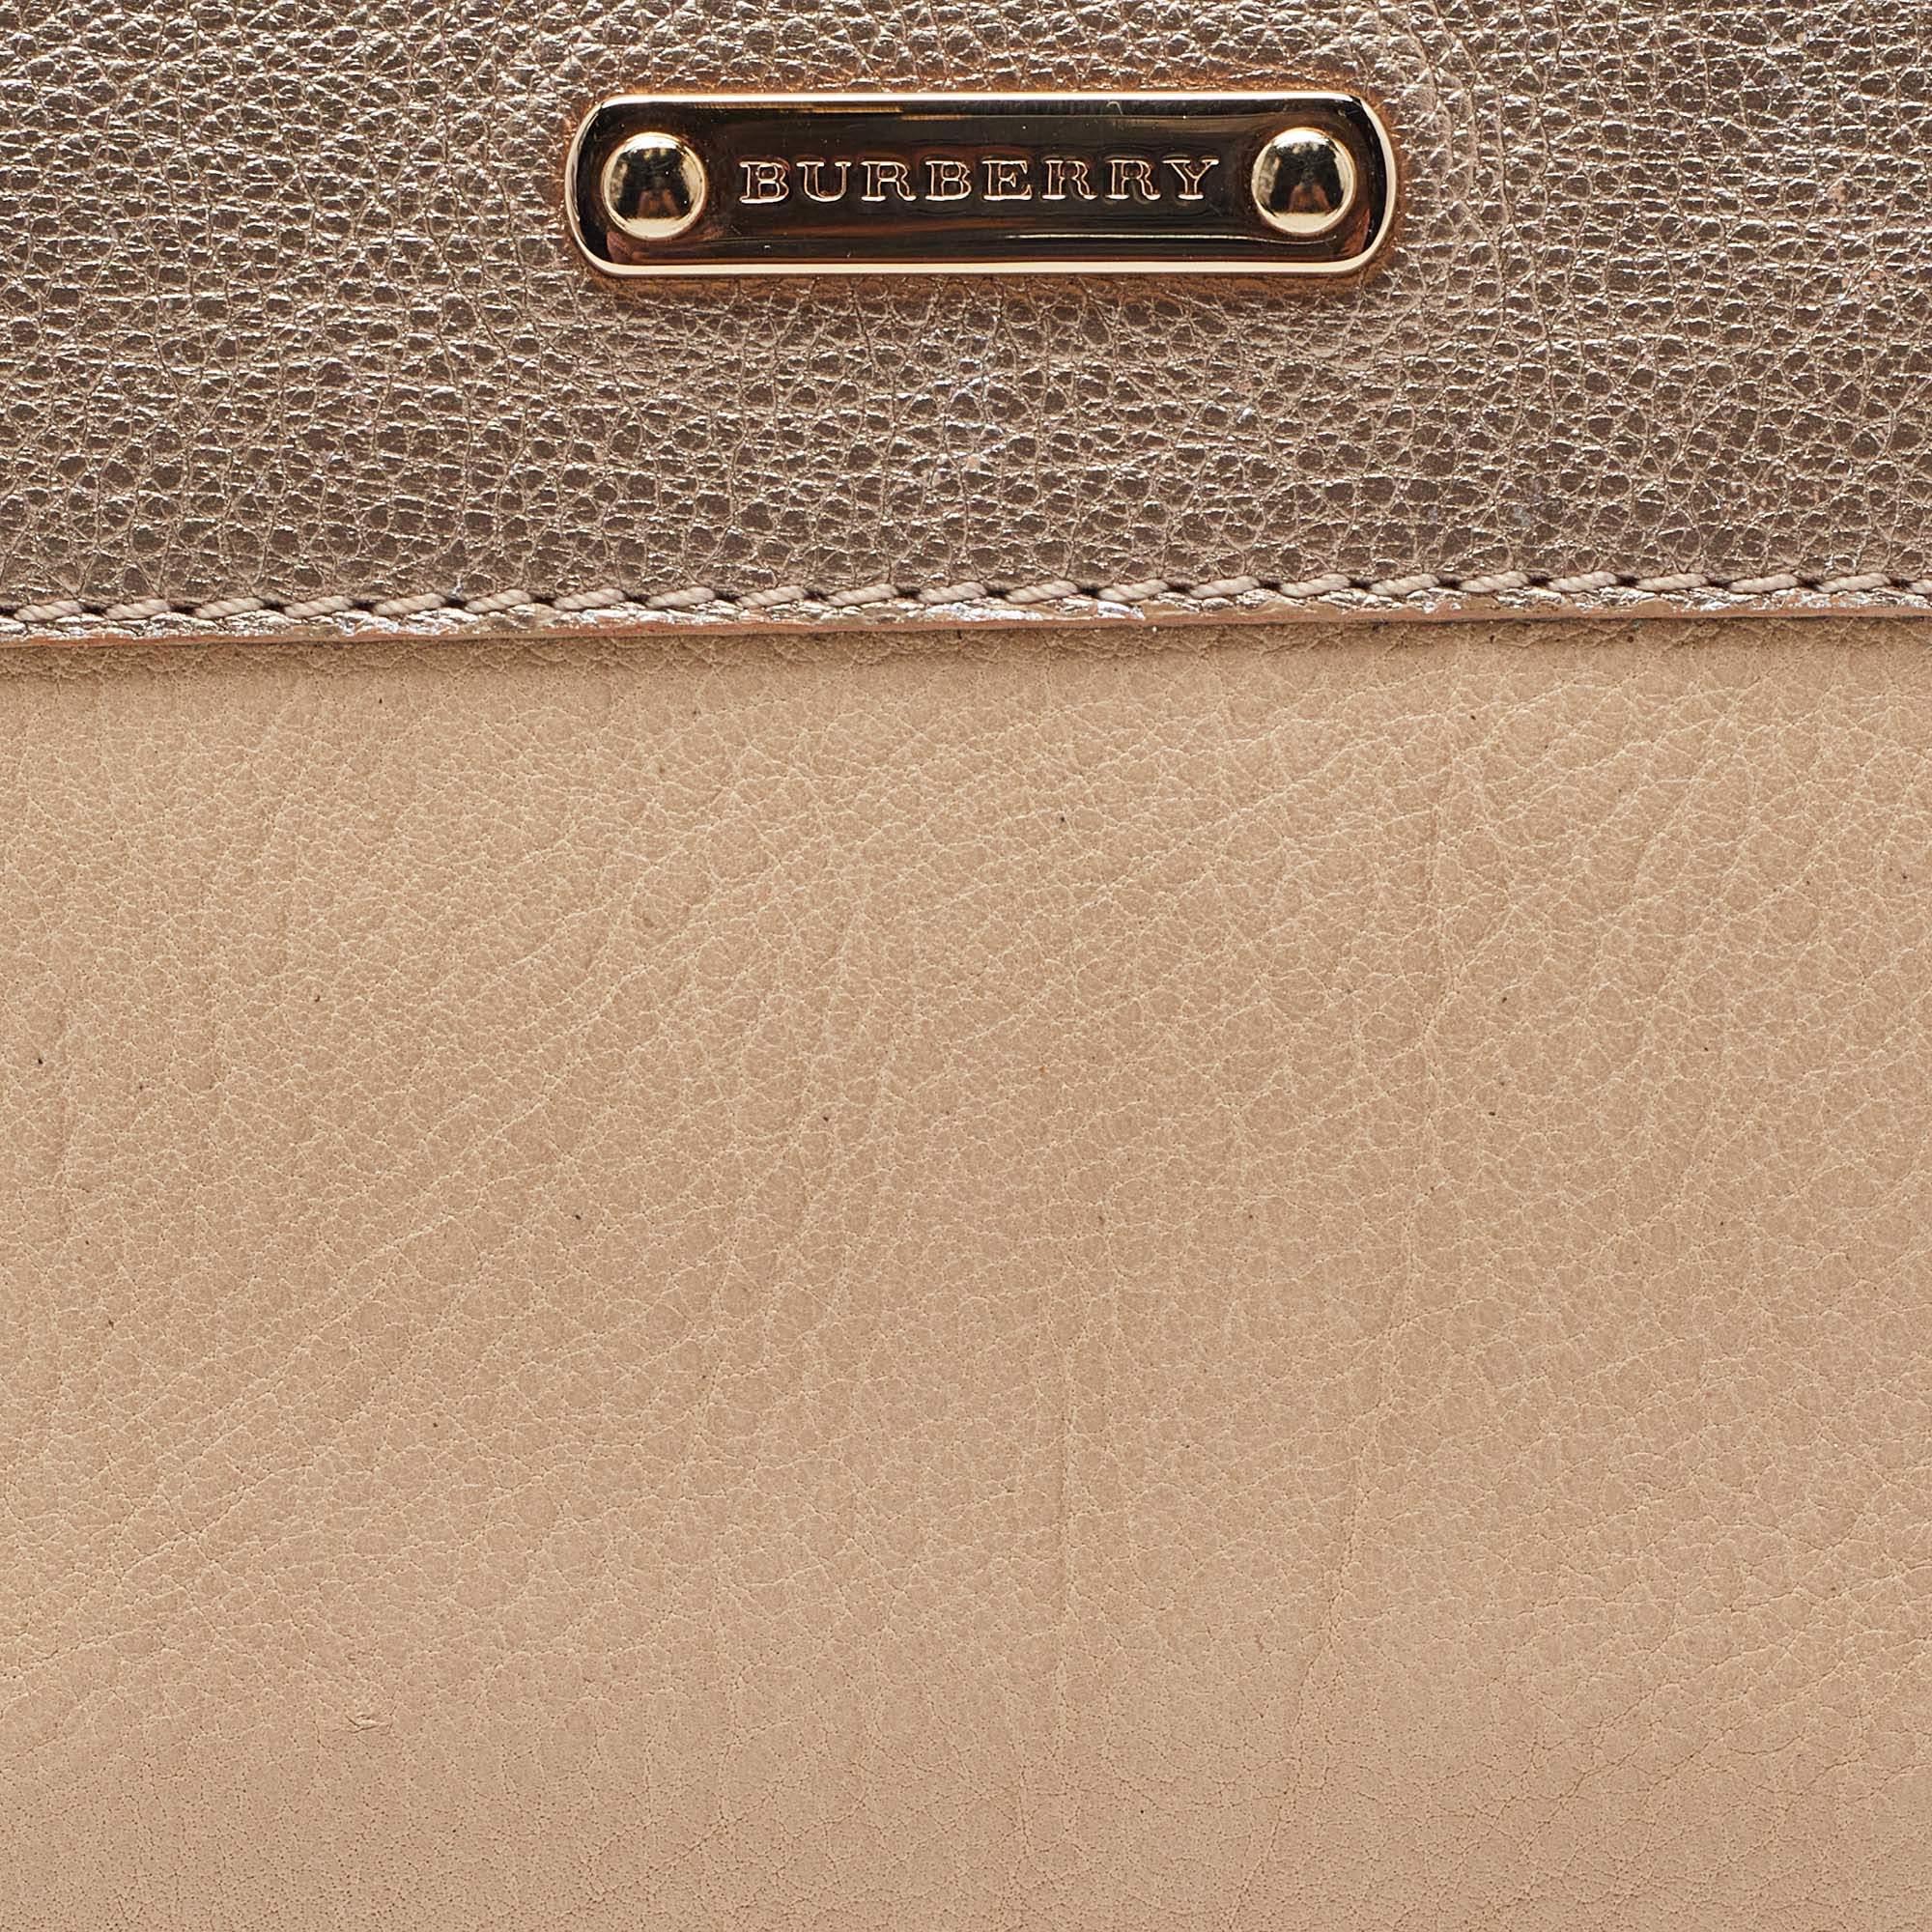 Burberry Beige/Gold Leather Double Zip Chain Wallet Burberry